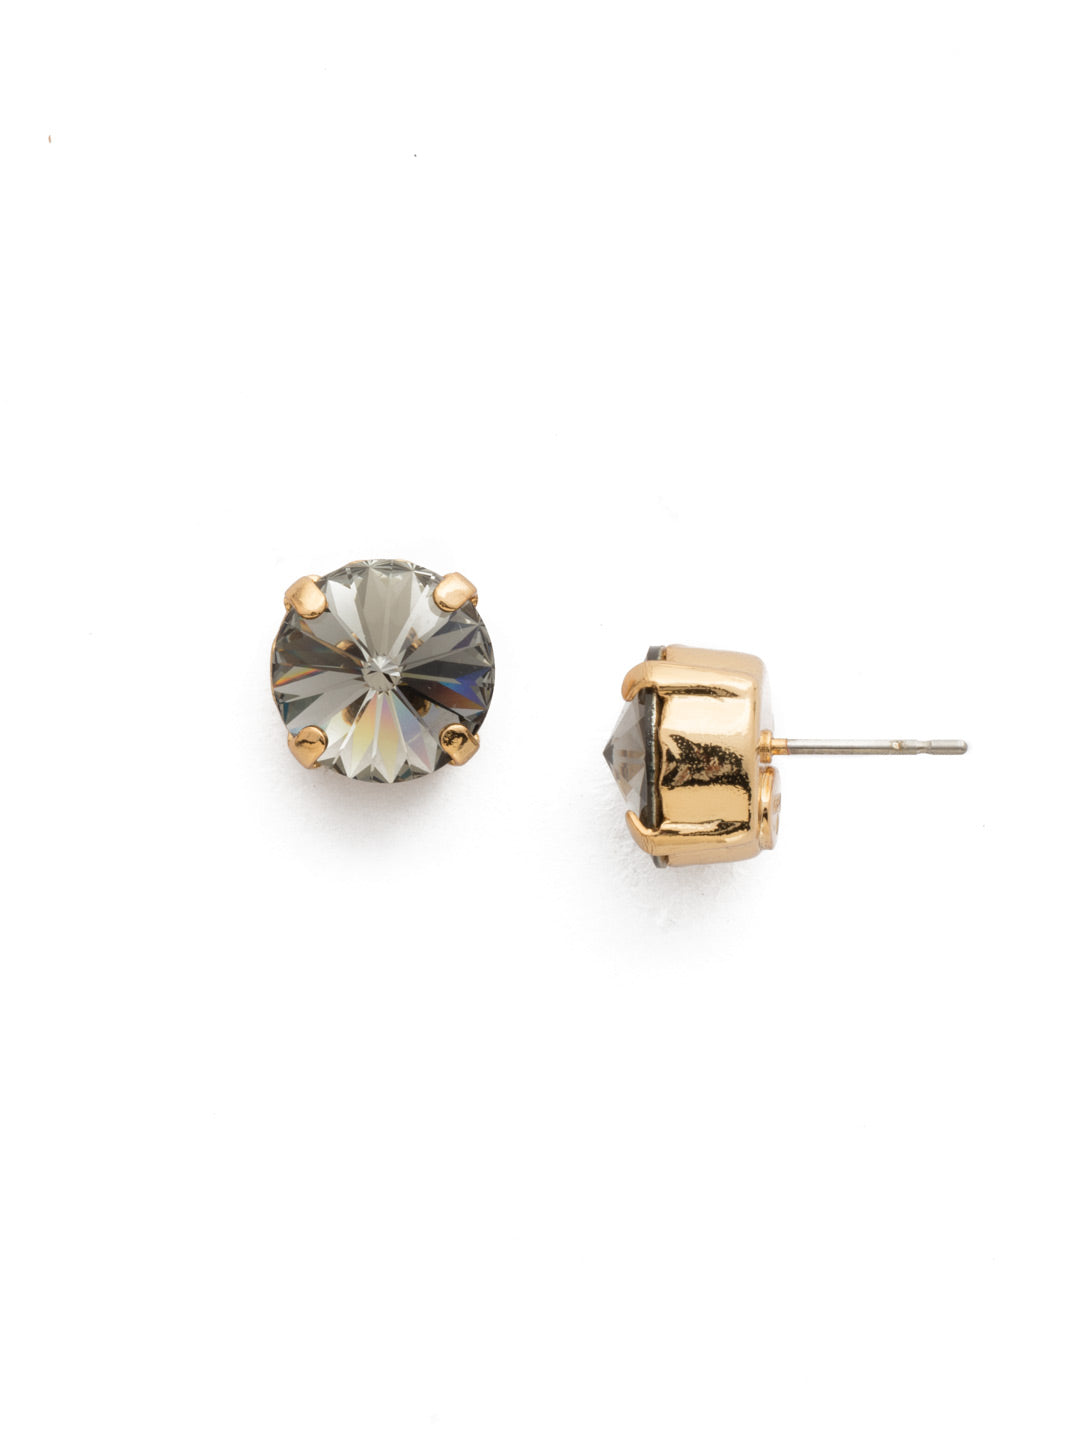 London Stud Earrings - ECM14BGBD - <p>Everyone needs a great pair of studs. Add some classic sparkle to any occasion with these stud earrings. Need help picking a stud? <a href="https://www.sorrelli.com/blogs/sisterhood/round-stud-earrings-101-a-rundown-of-sizes-styles-and-sparkle">Check out our size guide!</a> From Sorrelli's Black Diamond collection in our Bright Gold-tone finish.</p>